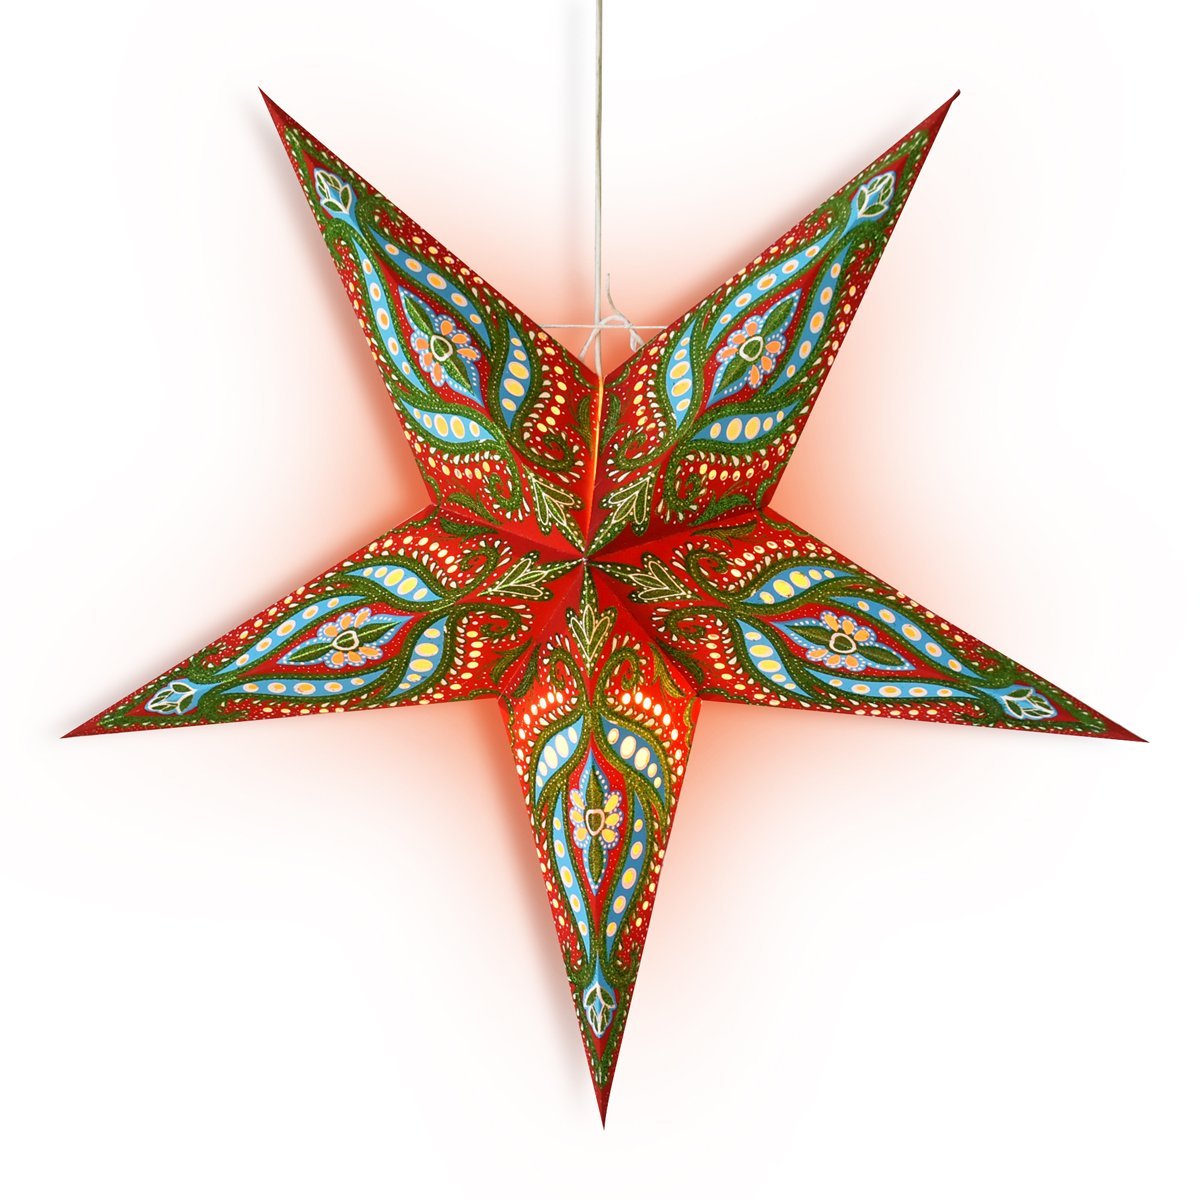 24&quot; Red / Green Bloom Glitter Paper Star Lantern, Hanging Wedding &amp; Party Decoration - PaperLanternStore.com - Paper Lanterns, Decor, Party Lights &amp; More